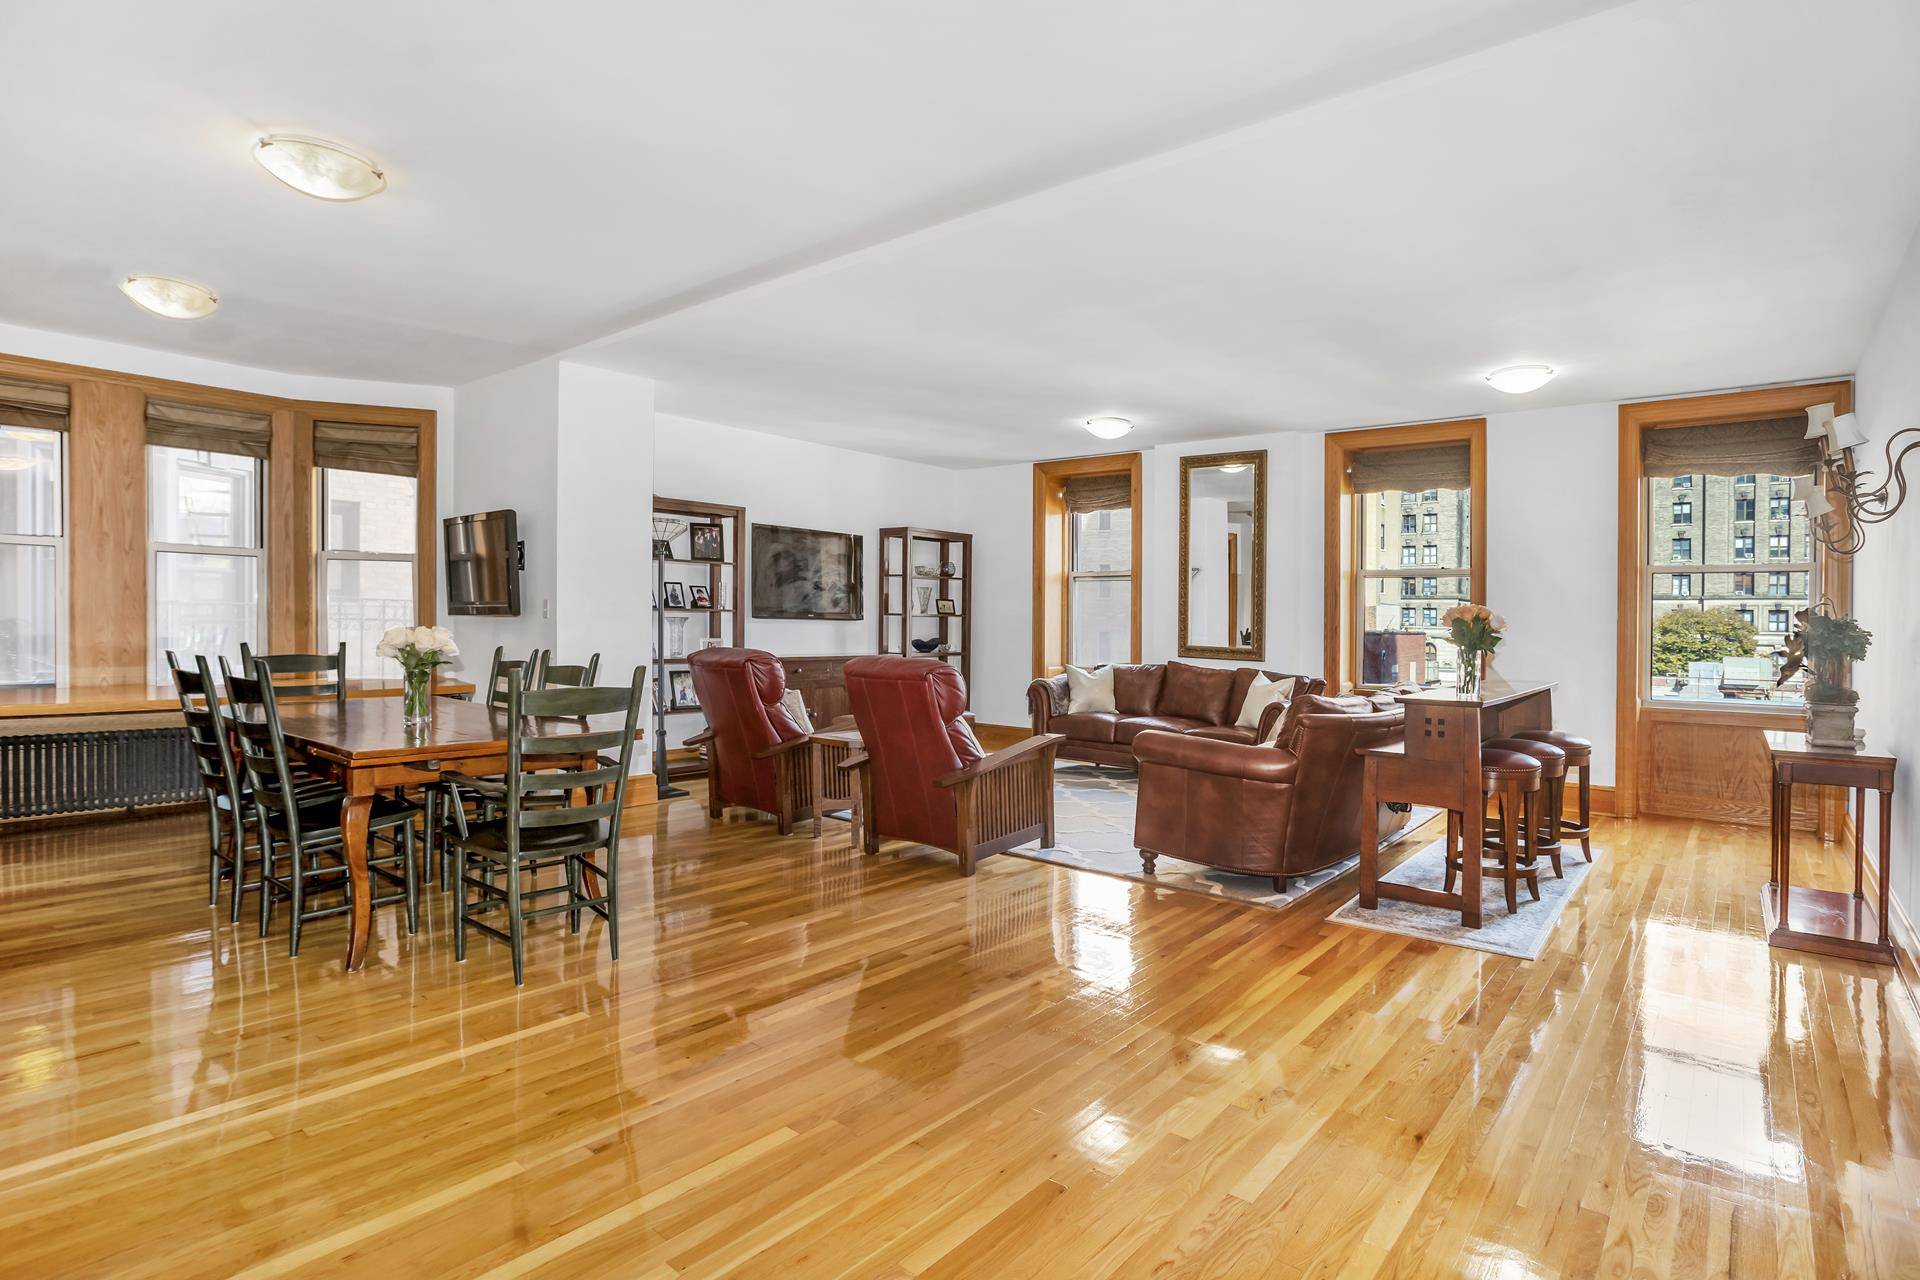 Don't miss this expansive and stunning four bedroom home in one of the Upper West Side's most beautiful Beaux Arts landmarks.